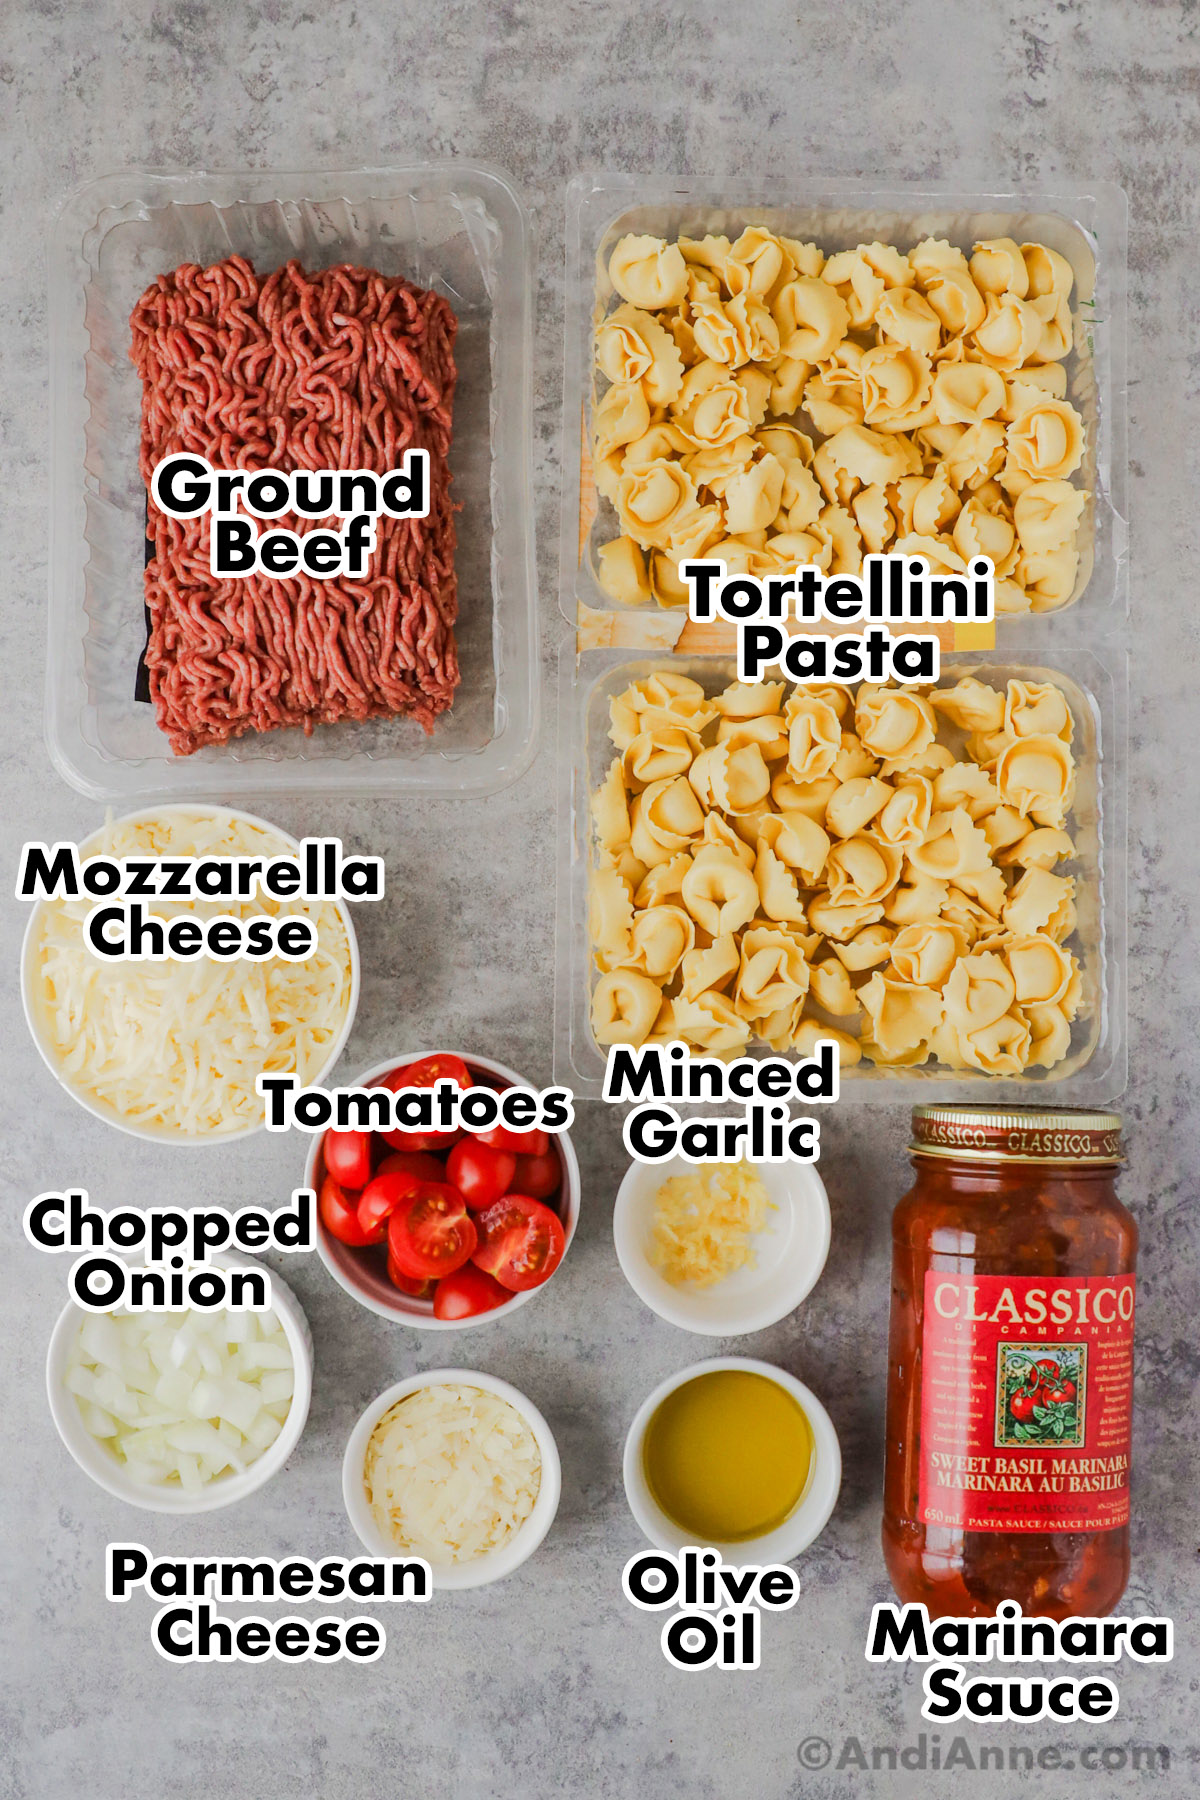 Recipe ingredients including raw ground beef, 2 packs of tortellini pasta, bowls of mozzarella cheese, sliced tomatoes, chopped onion, parmesan cheese, minced garlic and jar of marinara.